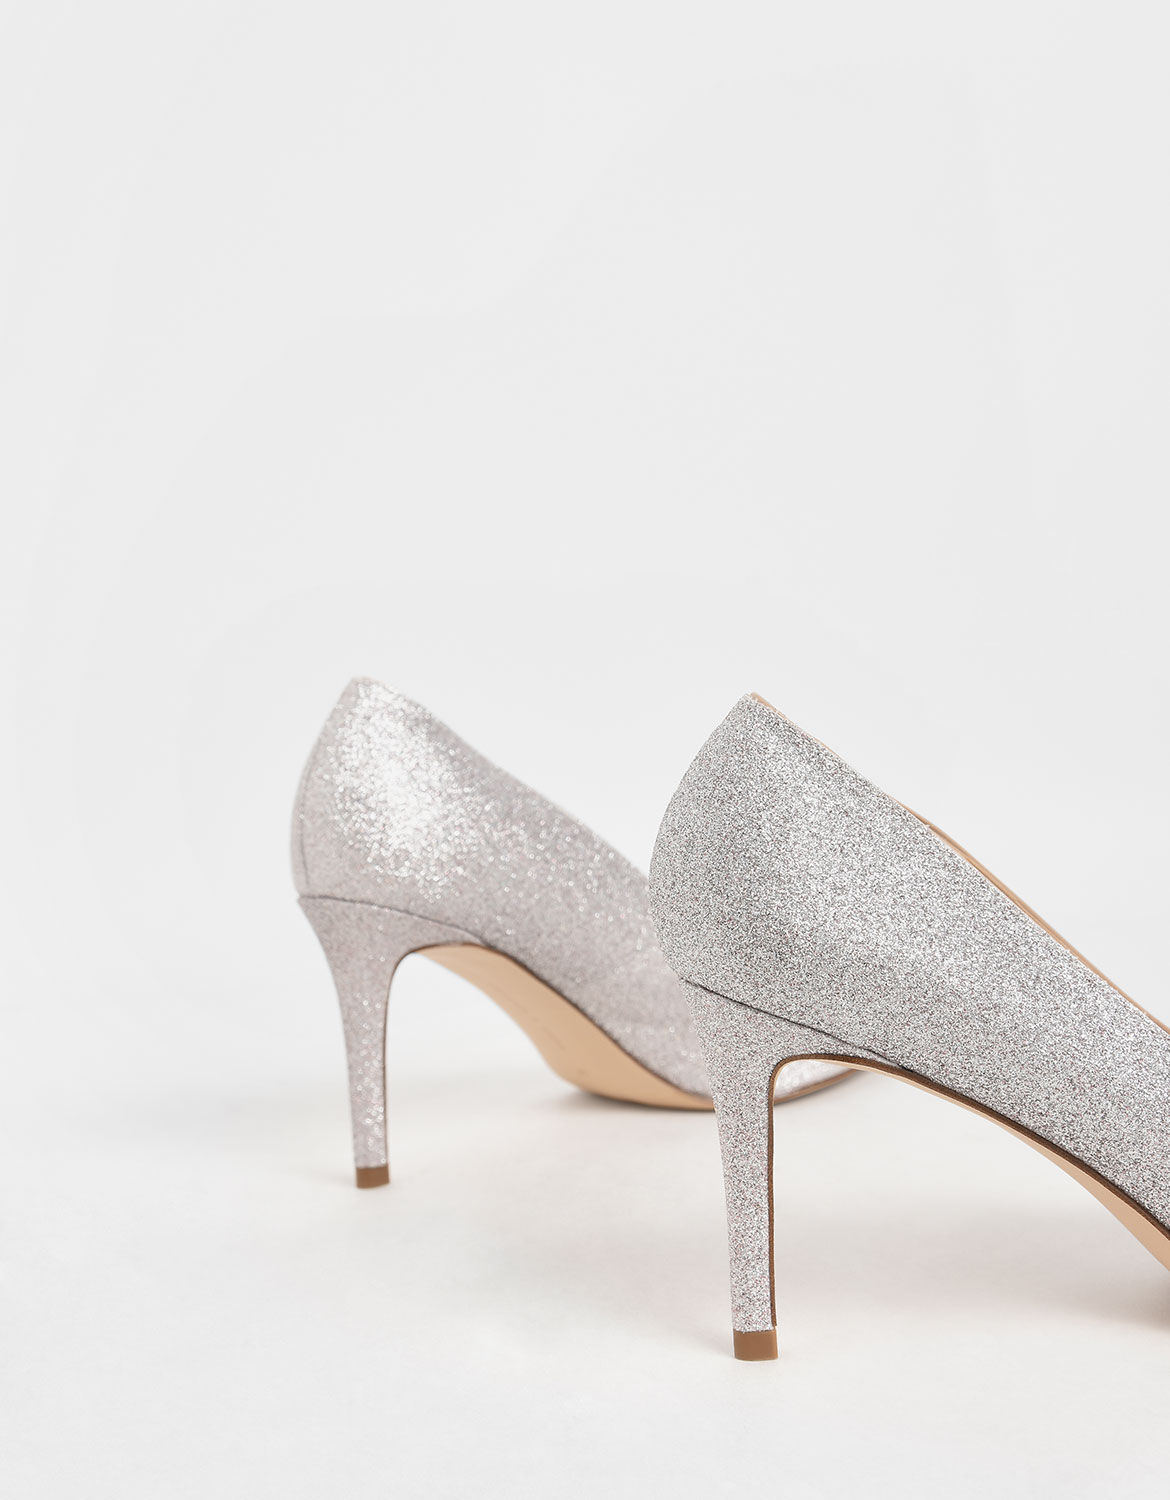 silver heels and pumps